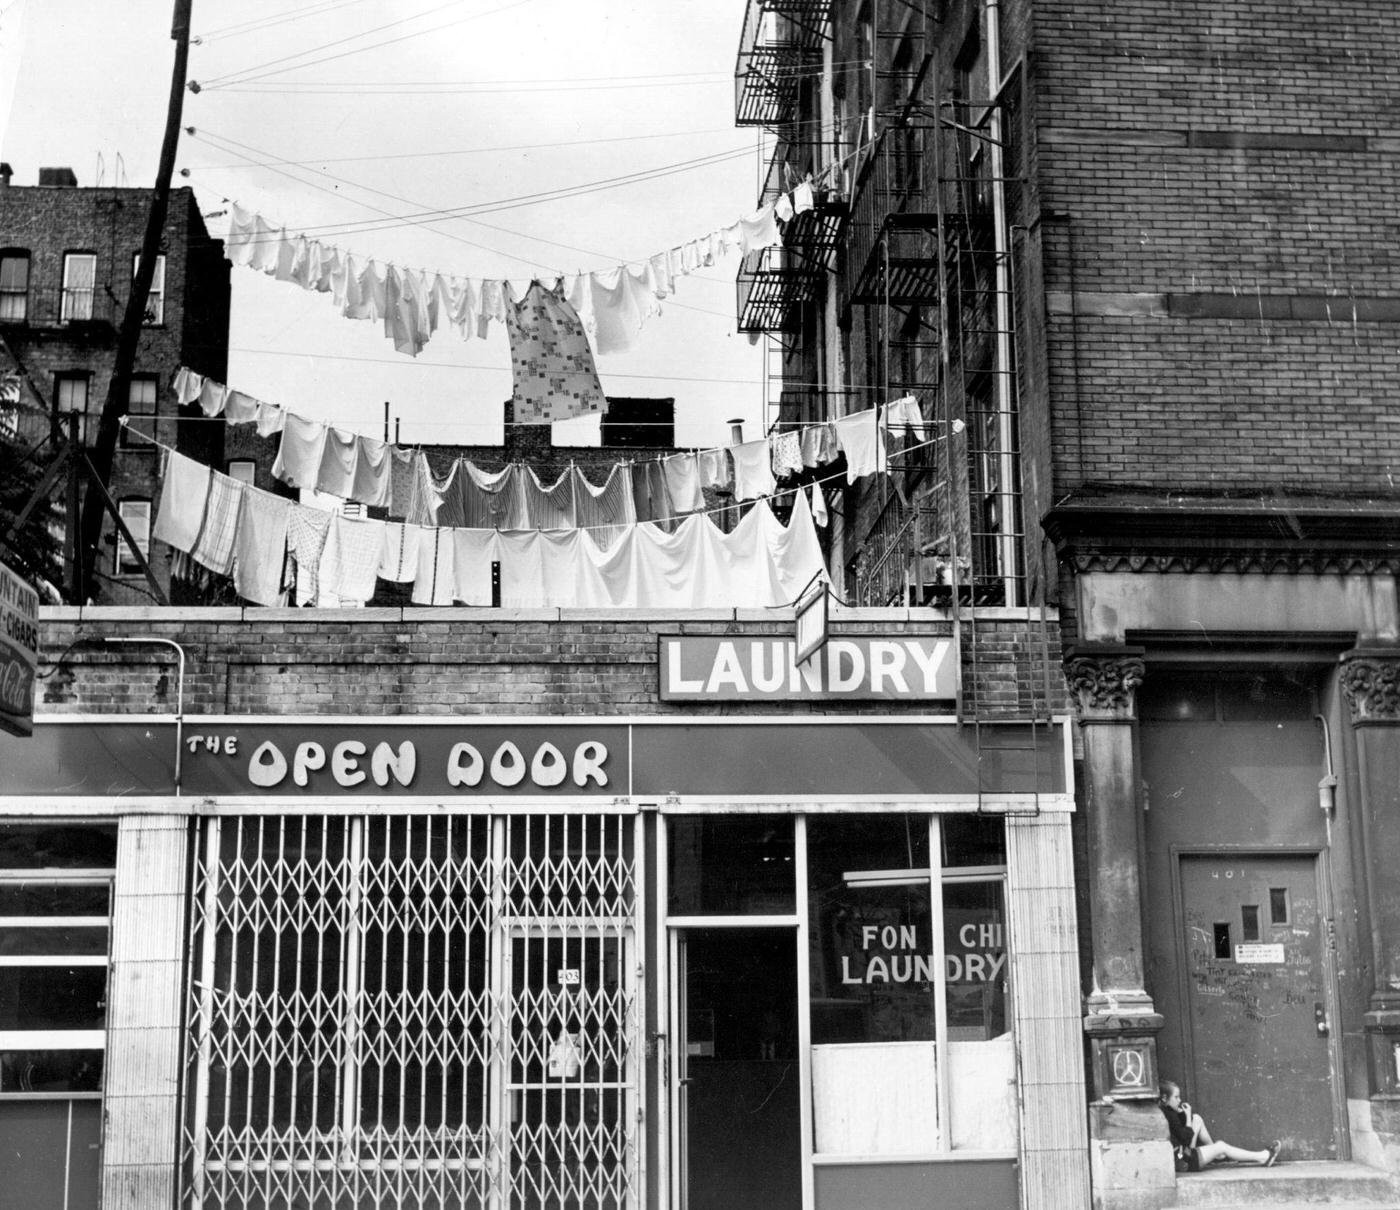 Clean Washing Hanging One Block West Of Times Square, Manhattan, 1977.